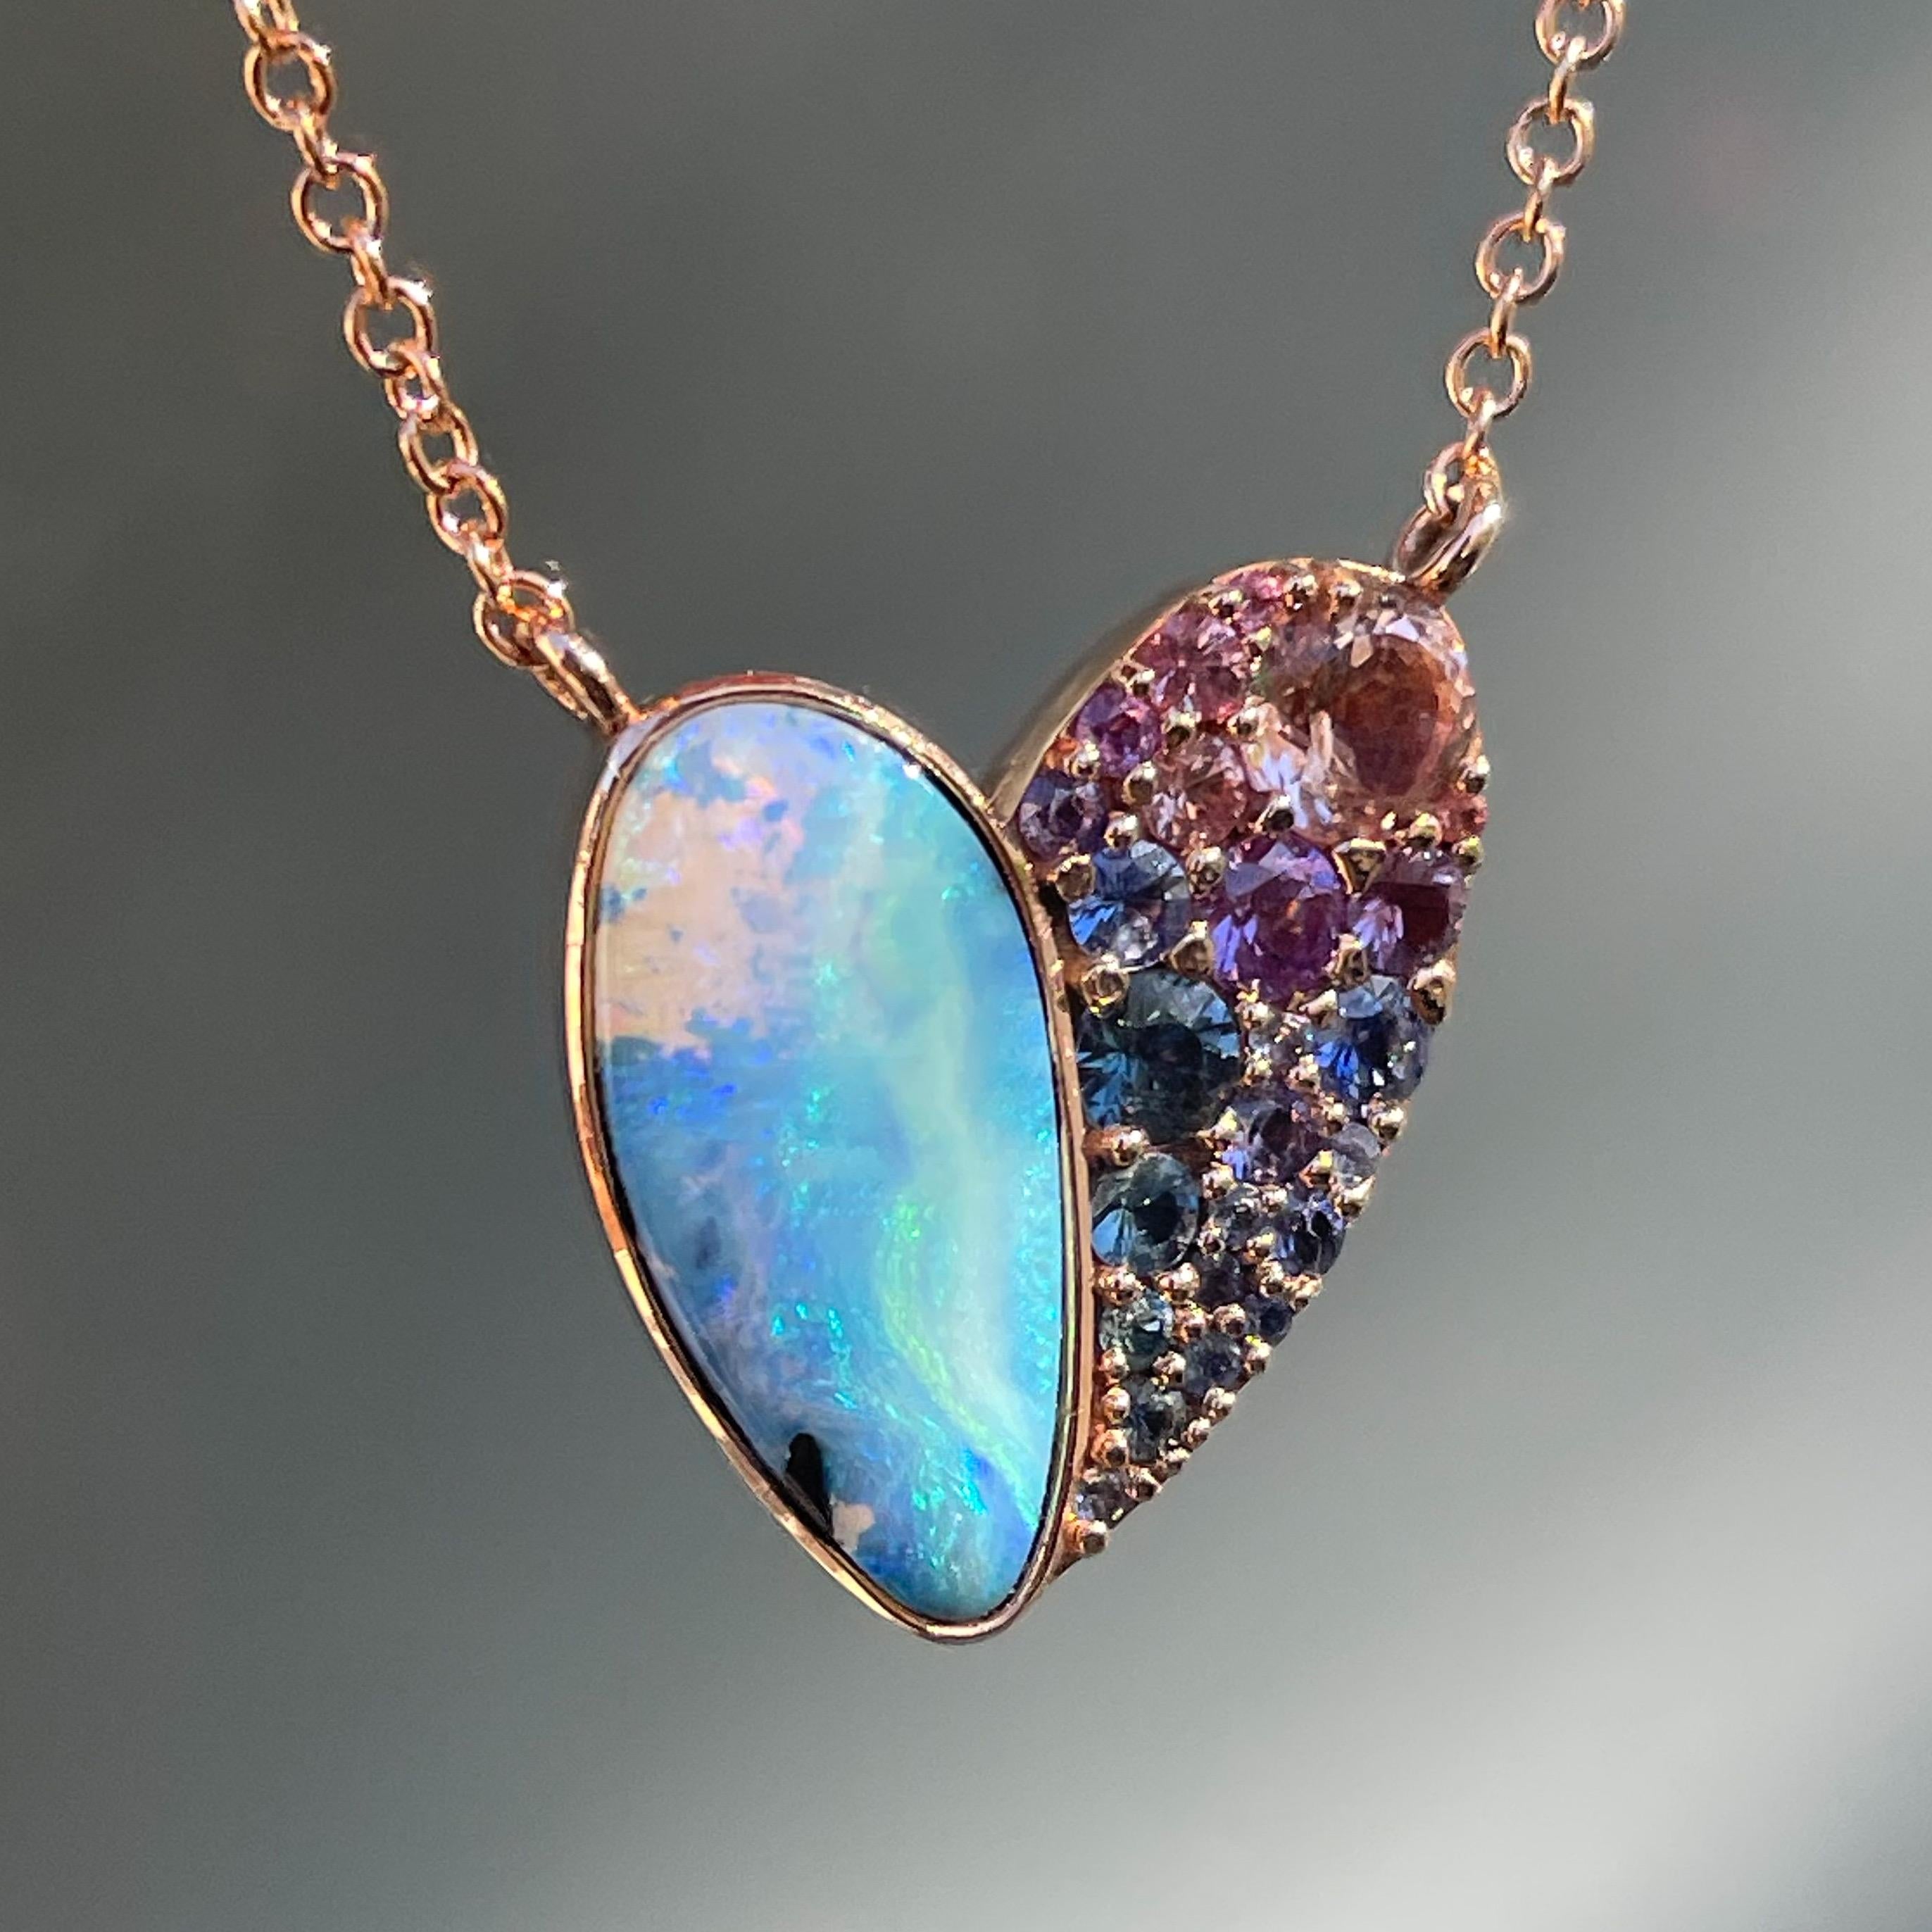 Brilliant Cut NIXIN Jewelry Cobbled Heart Opal Necklace with Sapphires in 14k Rose Gold